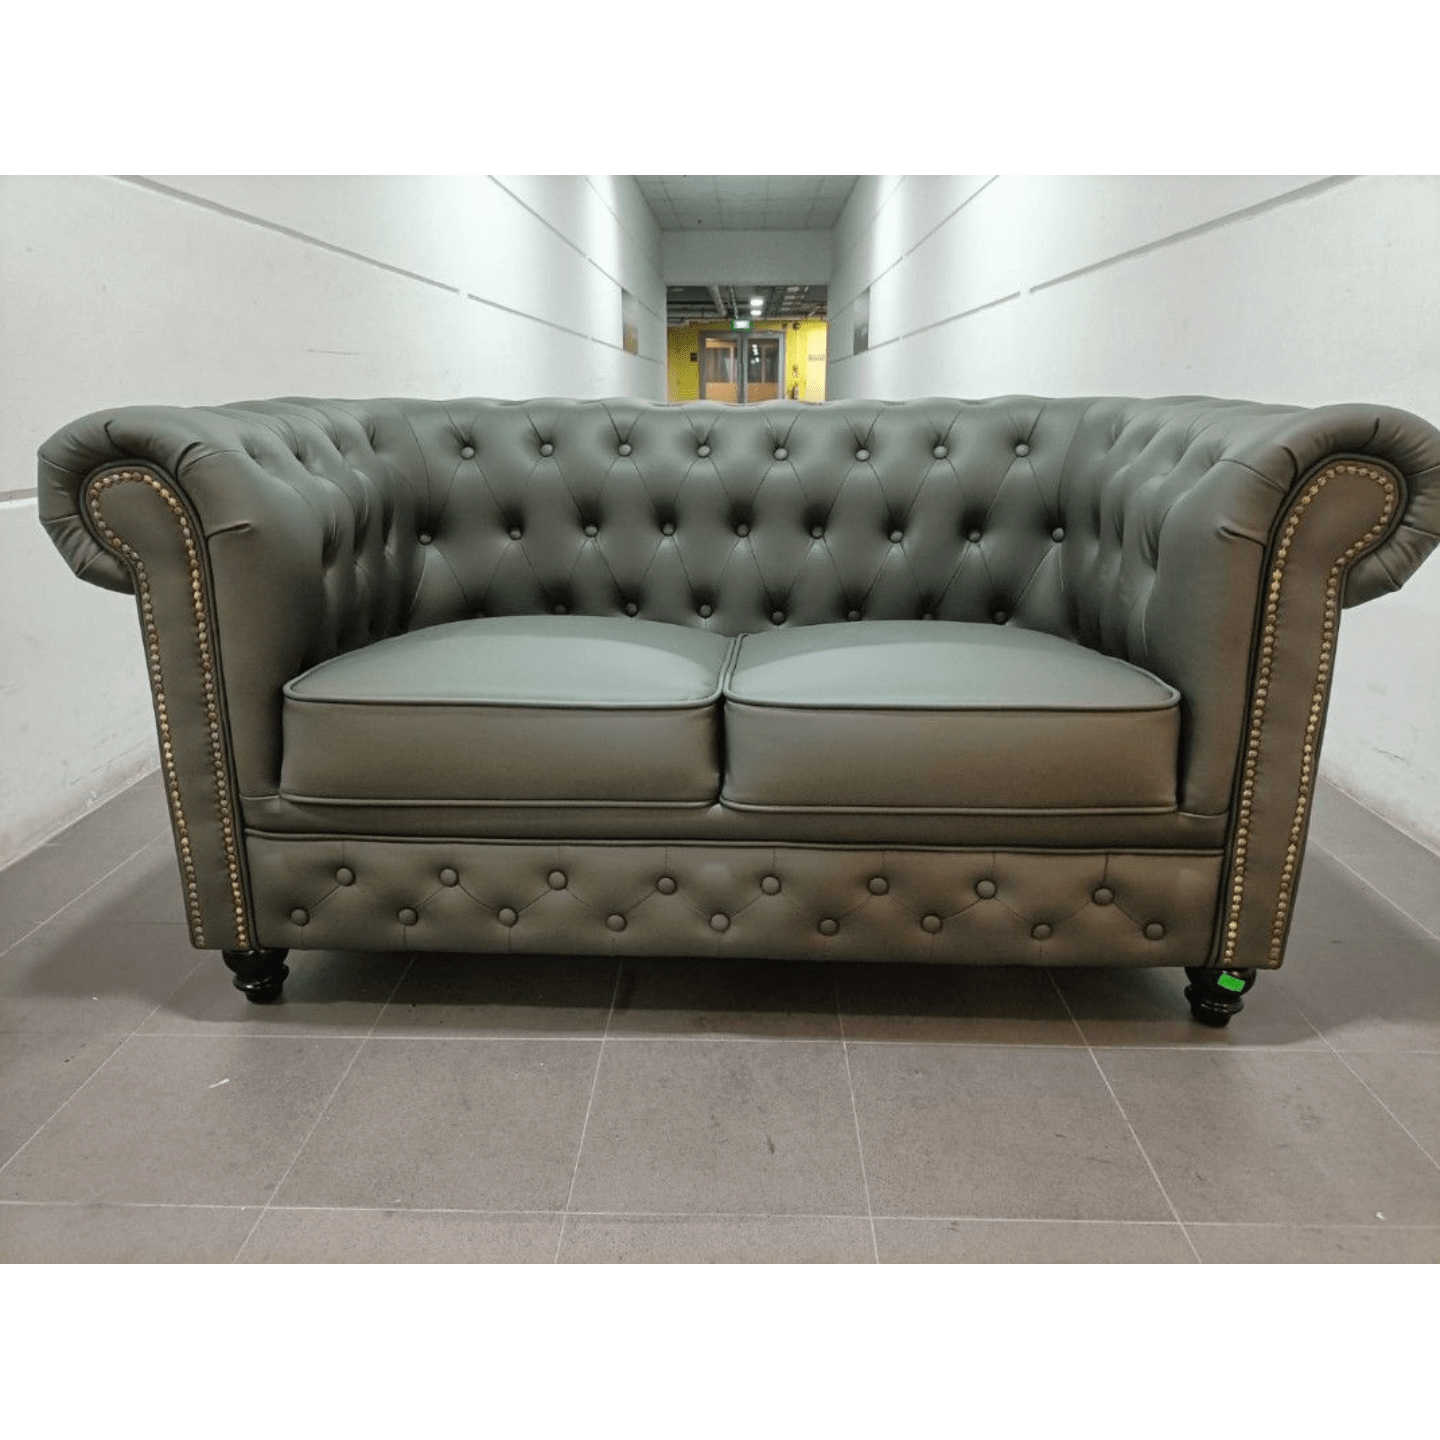 CAT FRIENDLY SALVADORE X 2 Seater Chesterfield Sofa in MATT OLIVE GREEN TECH LEATHAIRE